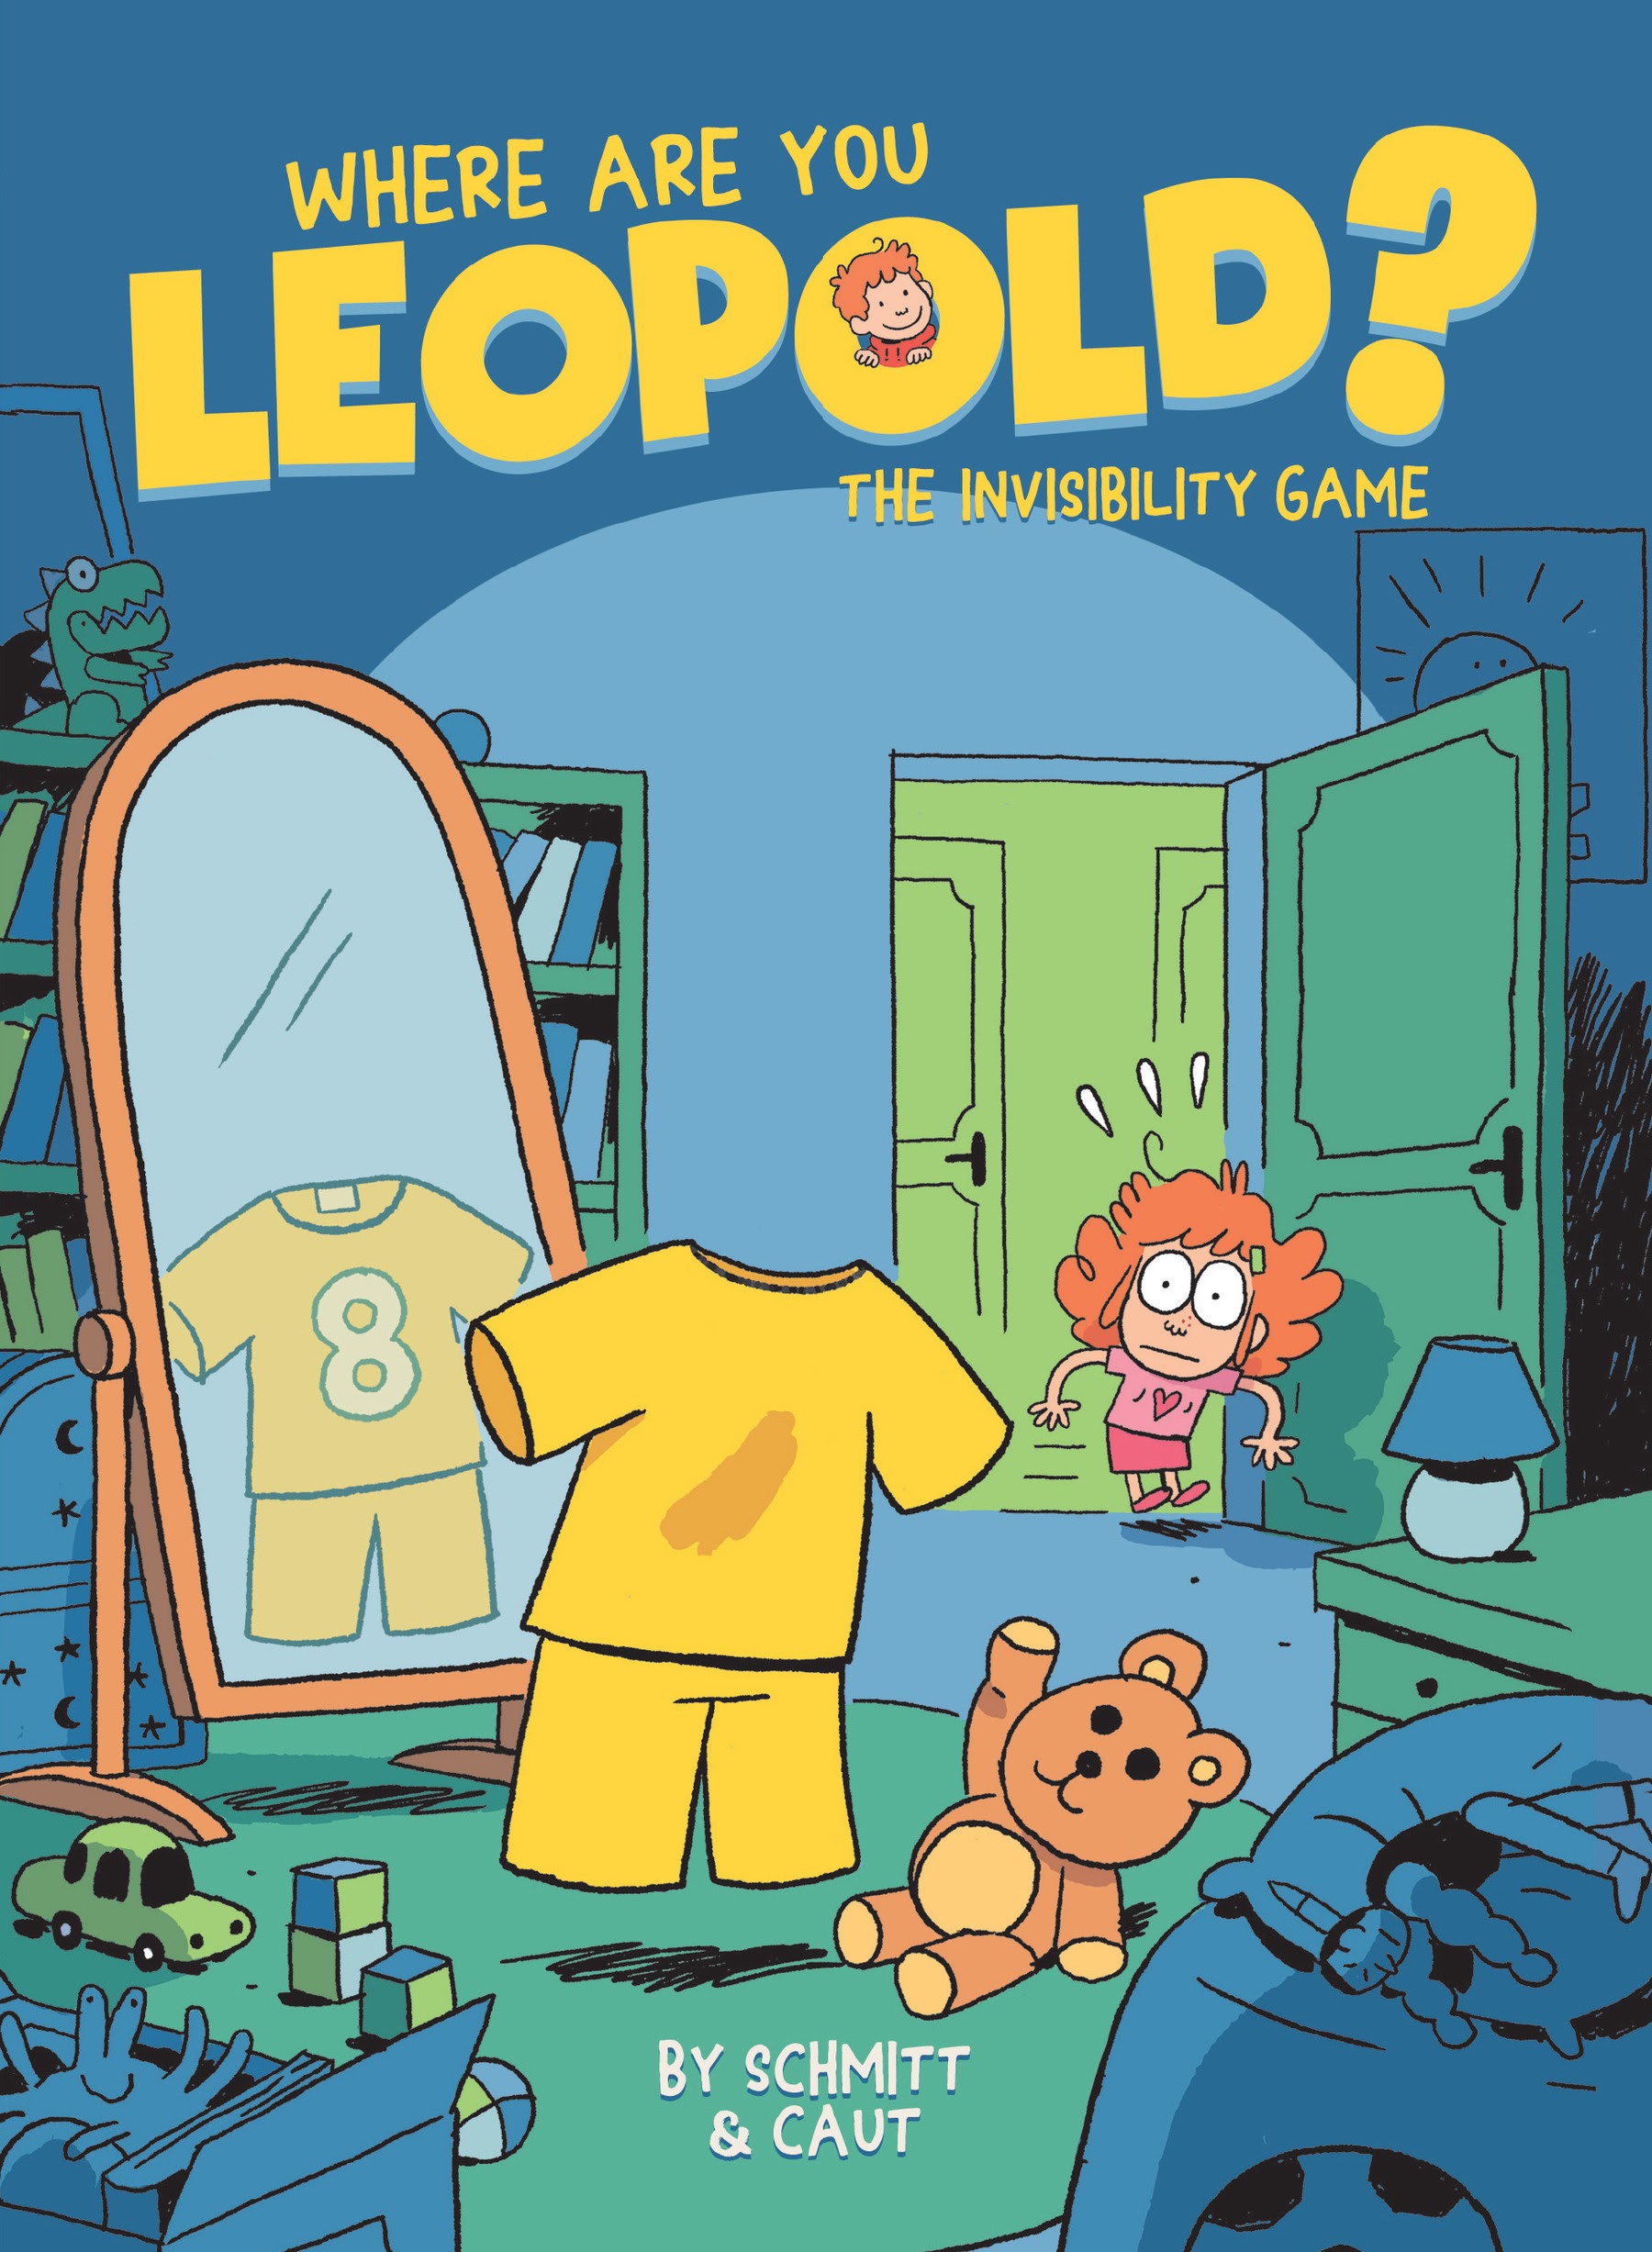 Read online Where Are You, Leopold? comic -  Issue # TPB 1 - 1